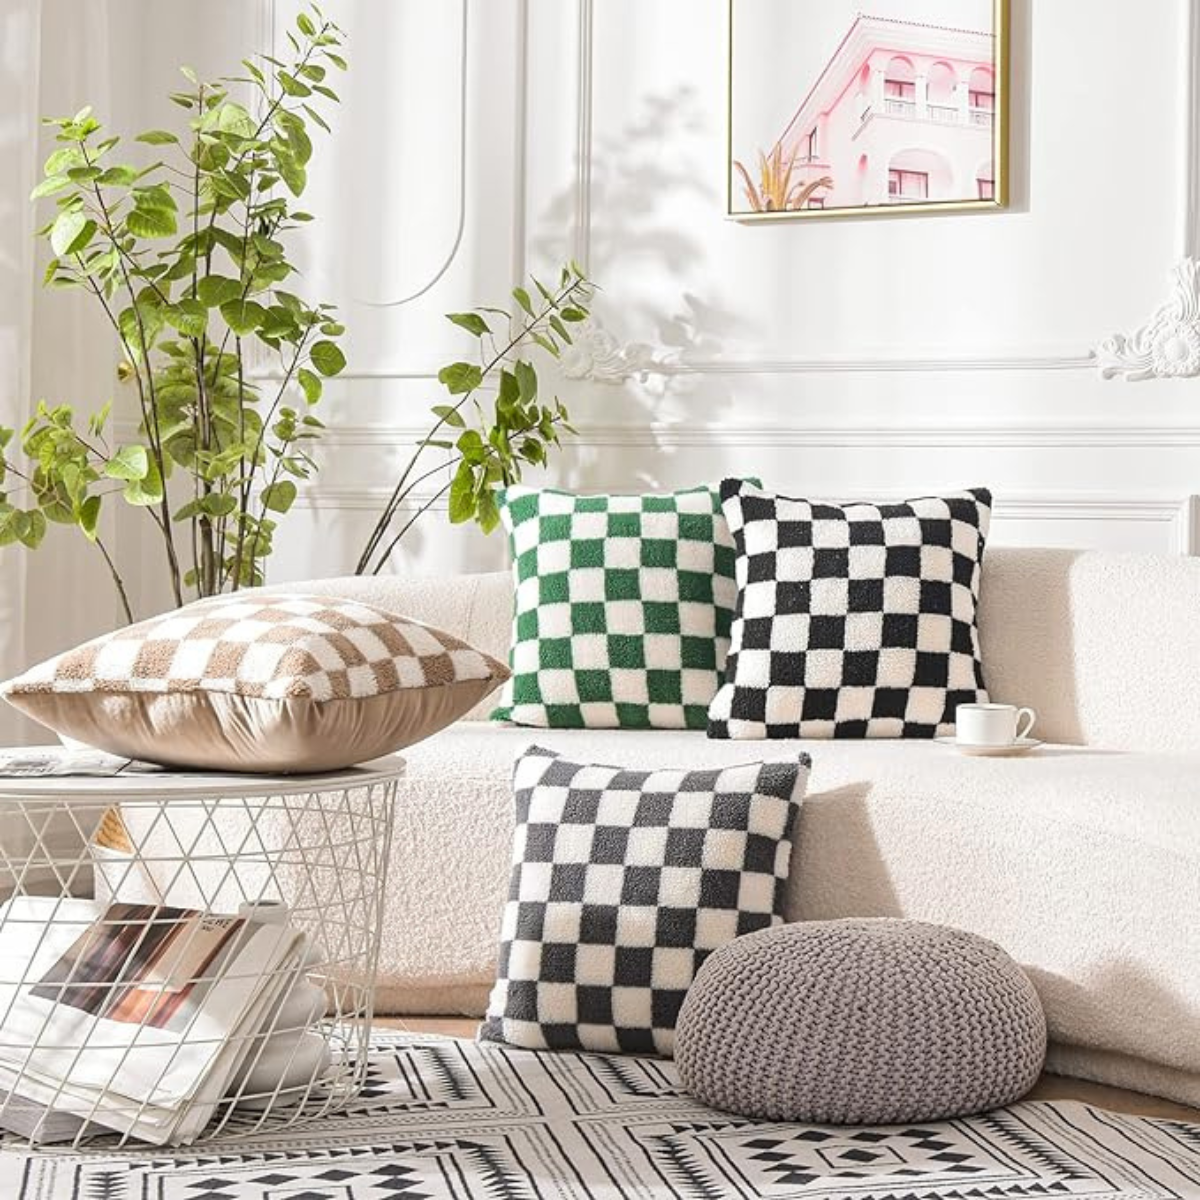 From Cozy Corners to Chic Comforts, 38 Splurges This Spring for the Happy Homebody